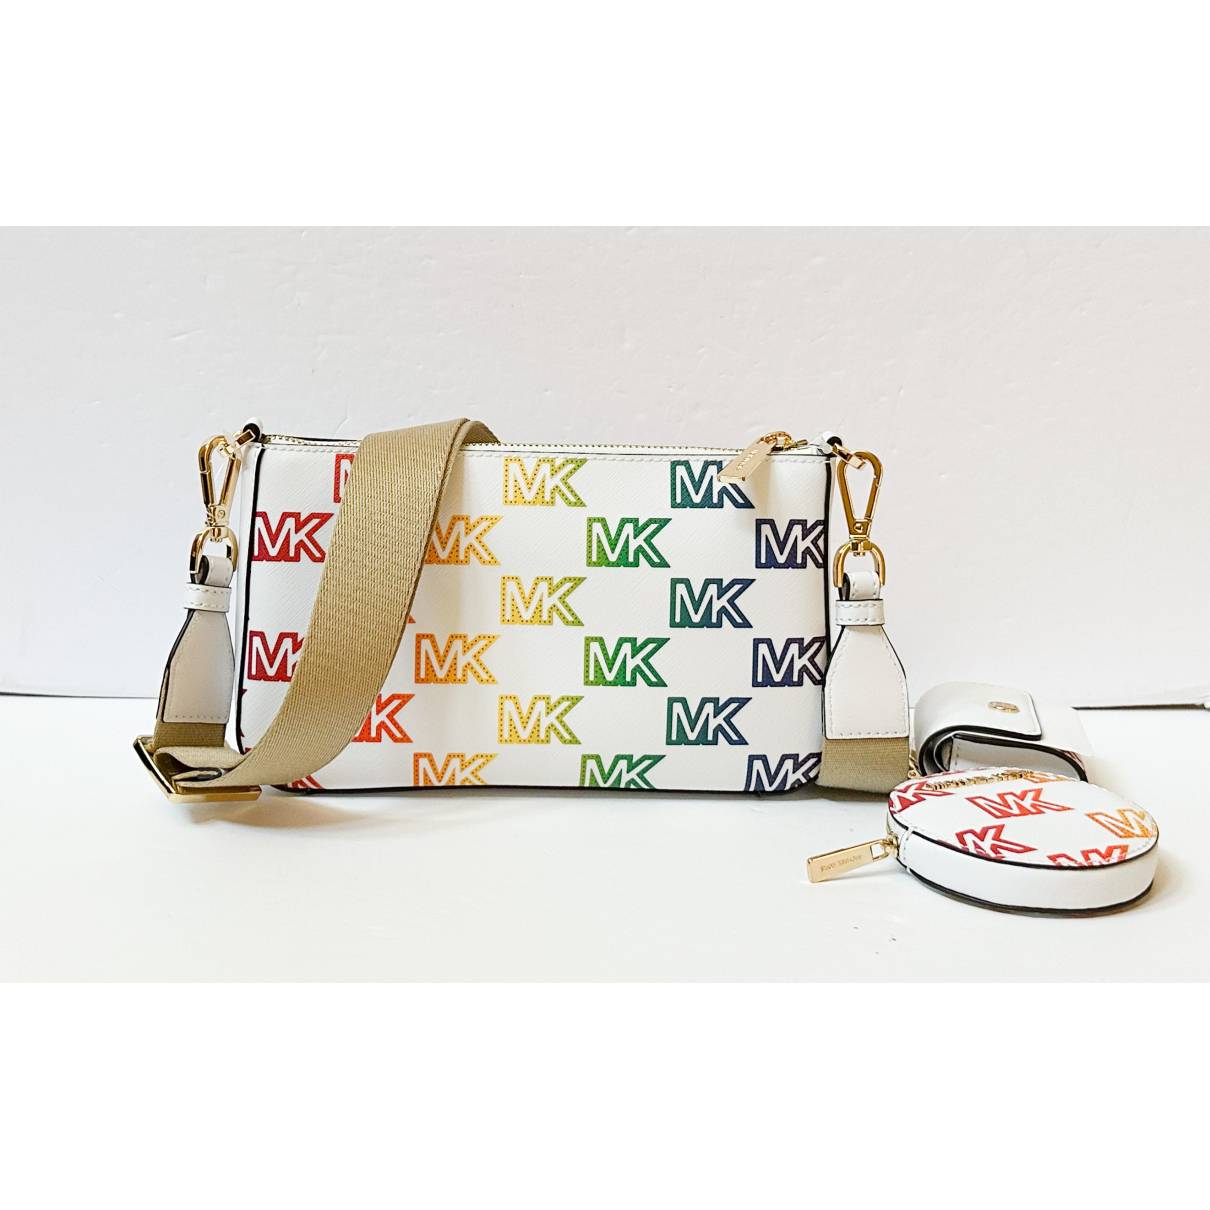 Michael Kors Optic White Rainbow Jet Set Travel Leather Clutch Wristlet, Best Price and Reviews